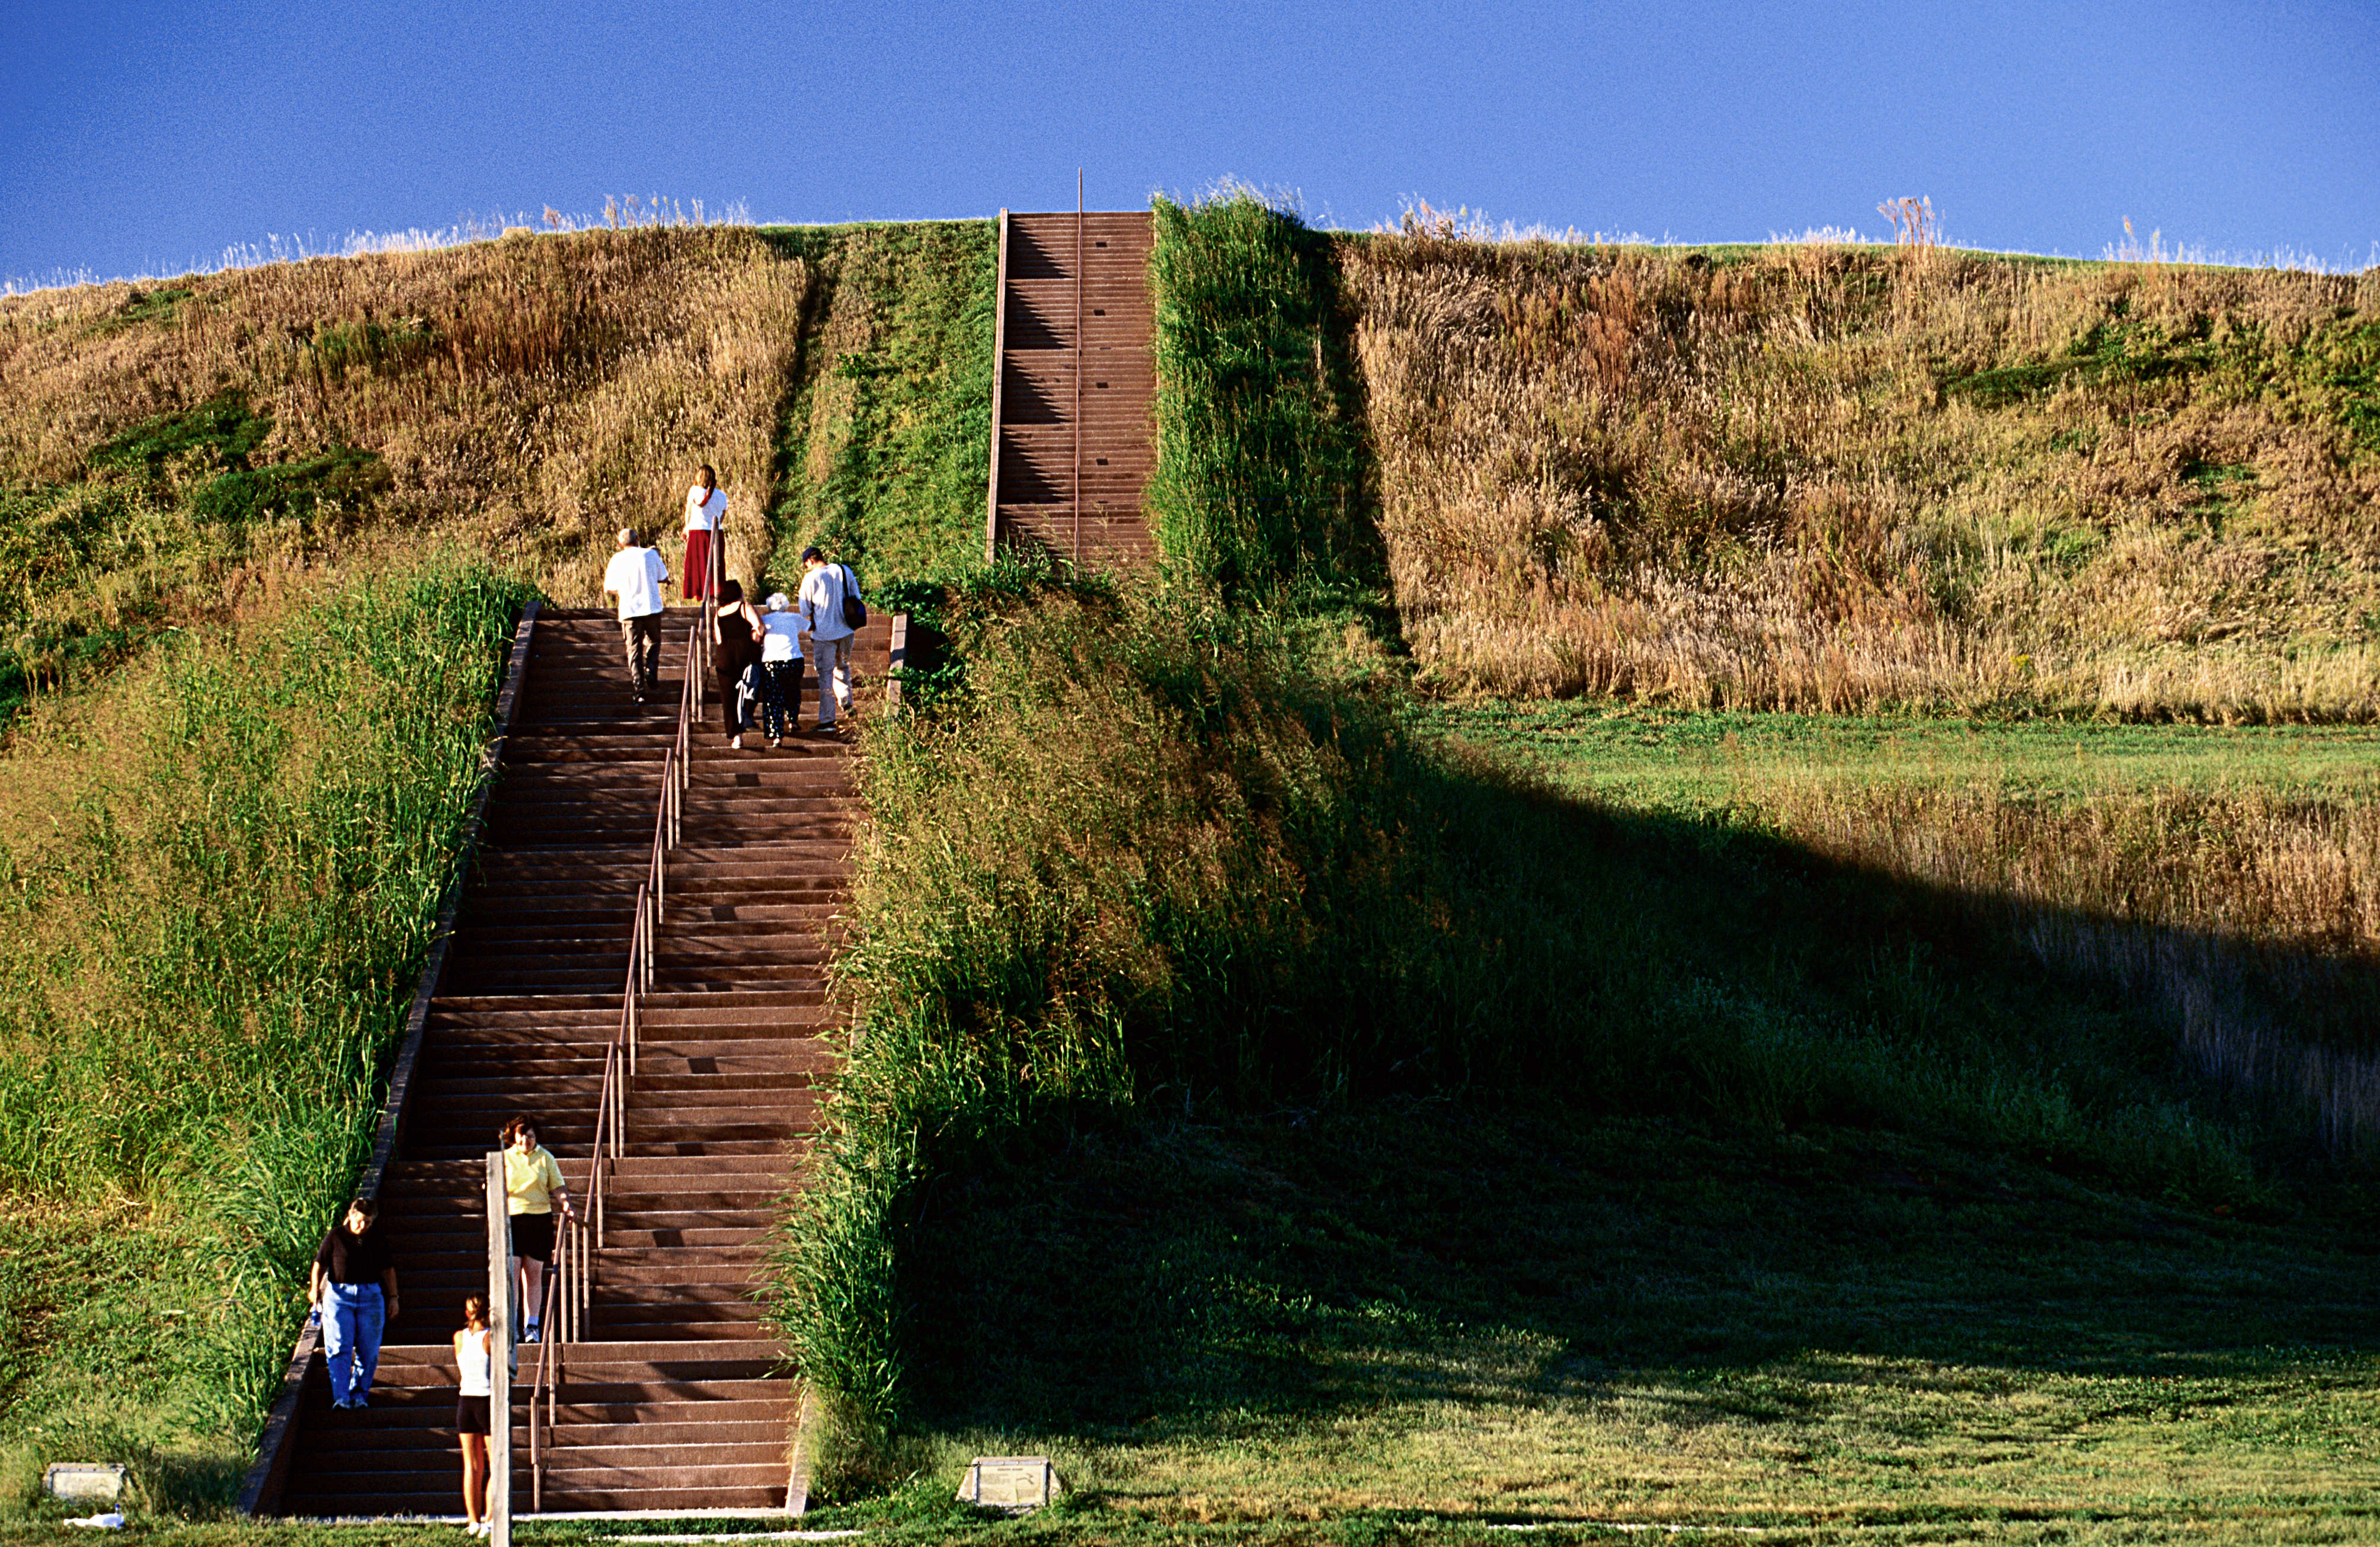 The mounds at Cahokia are some of the impressive remains from pre-colonial America. Image by Edie Brady / Getty Images